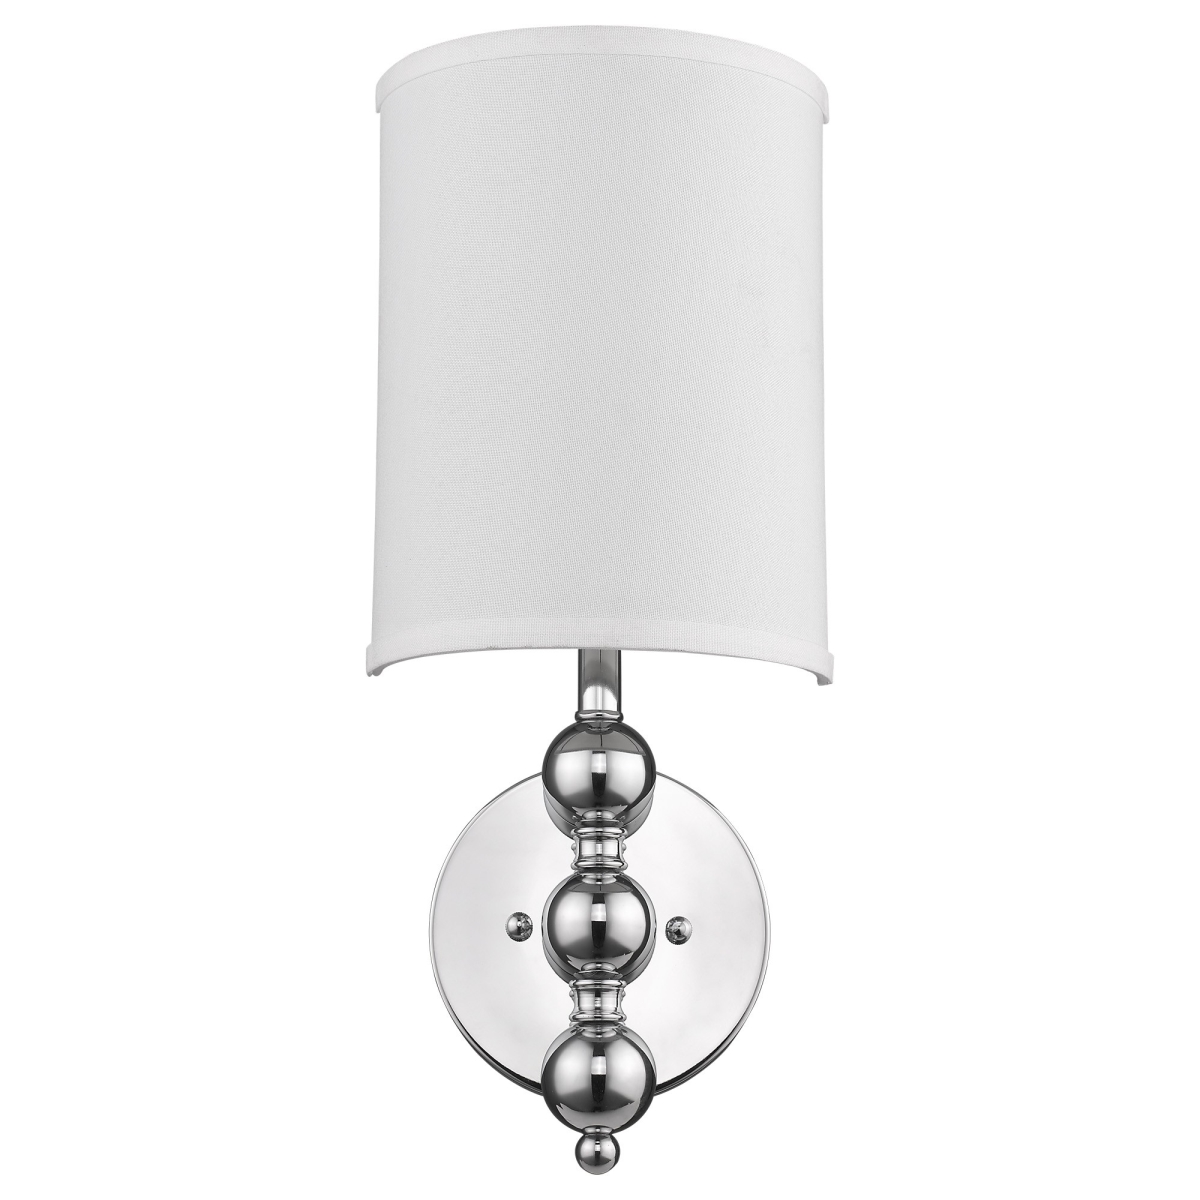 Picture of HomeRoots 398449 19 x 8 x 4 in. St. Clare 1-Light Polished Chrome Wall Sconce with White Linen 0.5 Round Shade